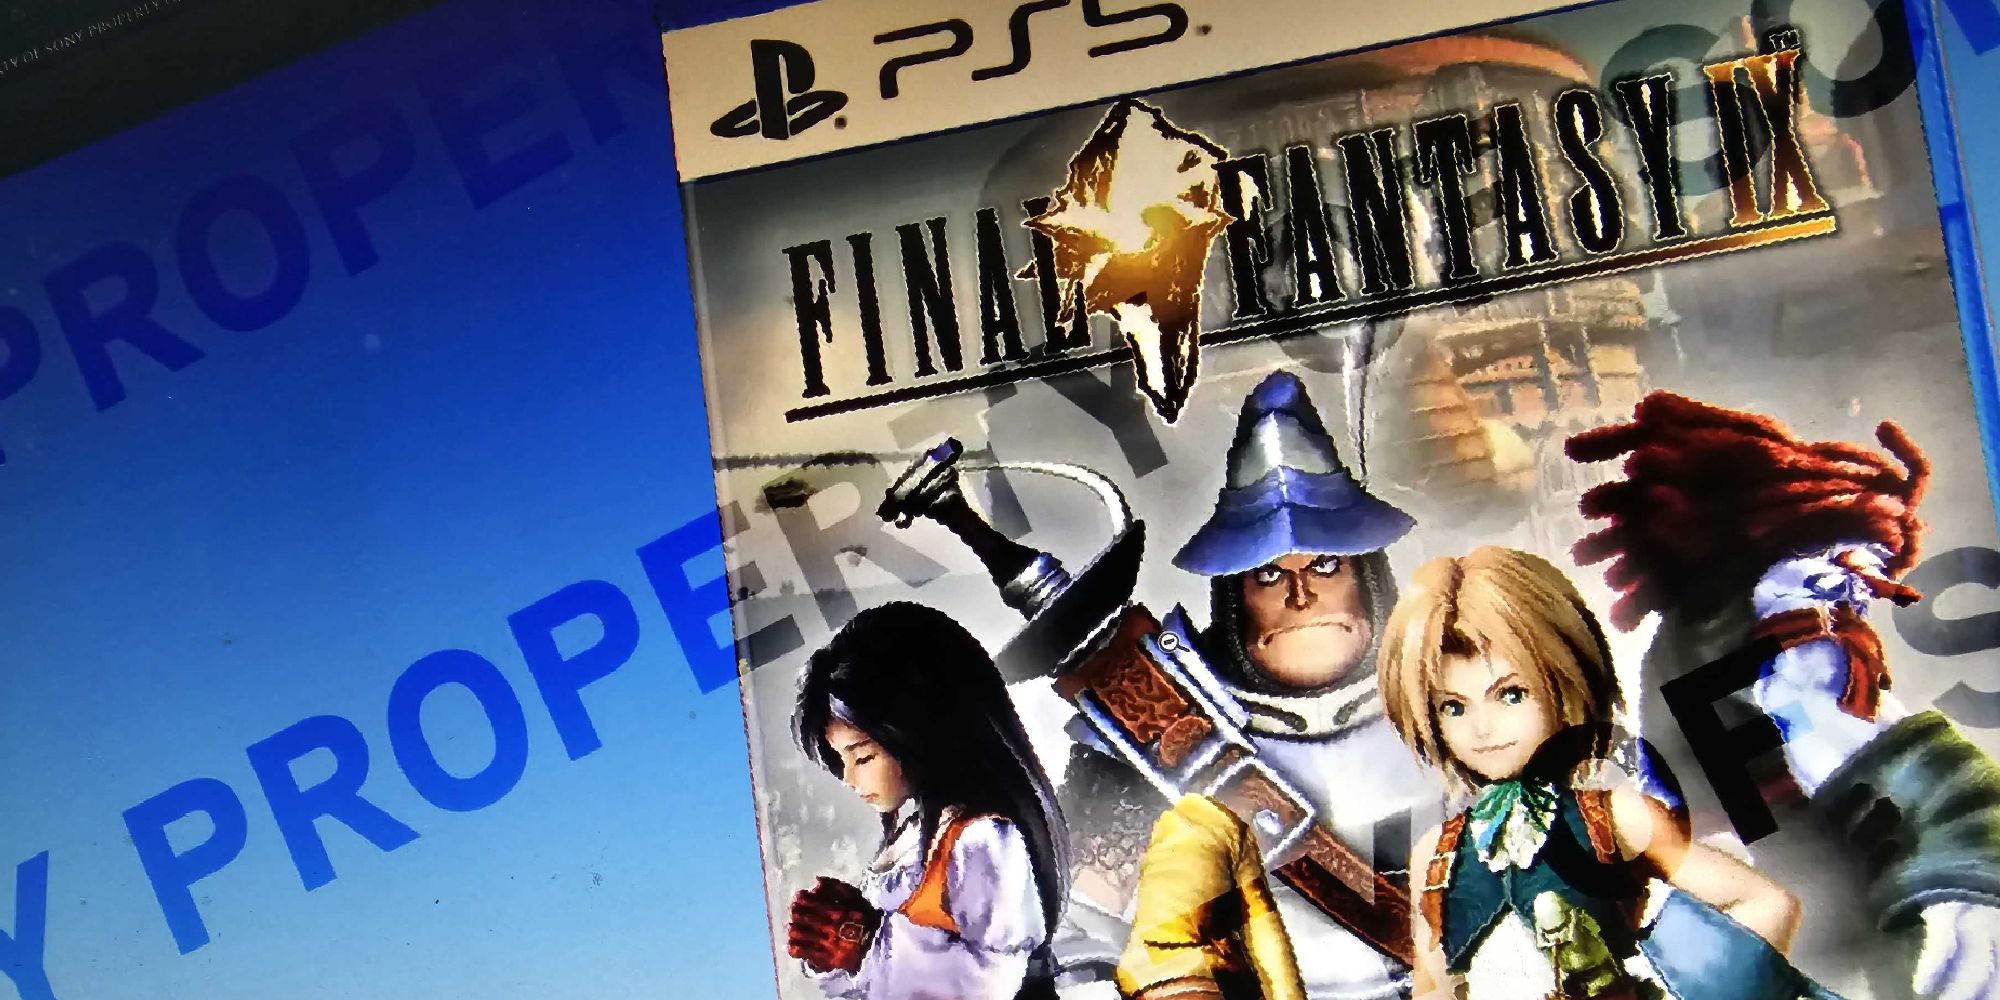 A Final Fantasy 9 remake is currently in development, reports